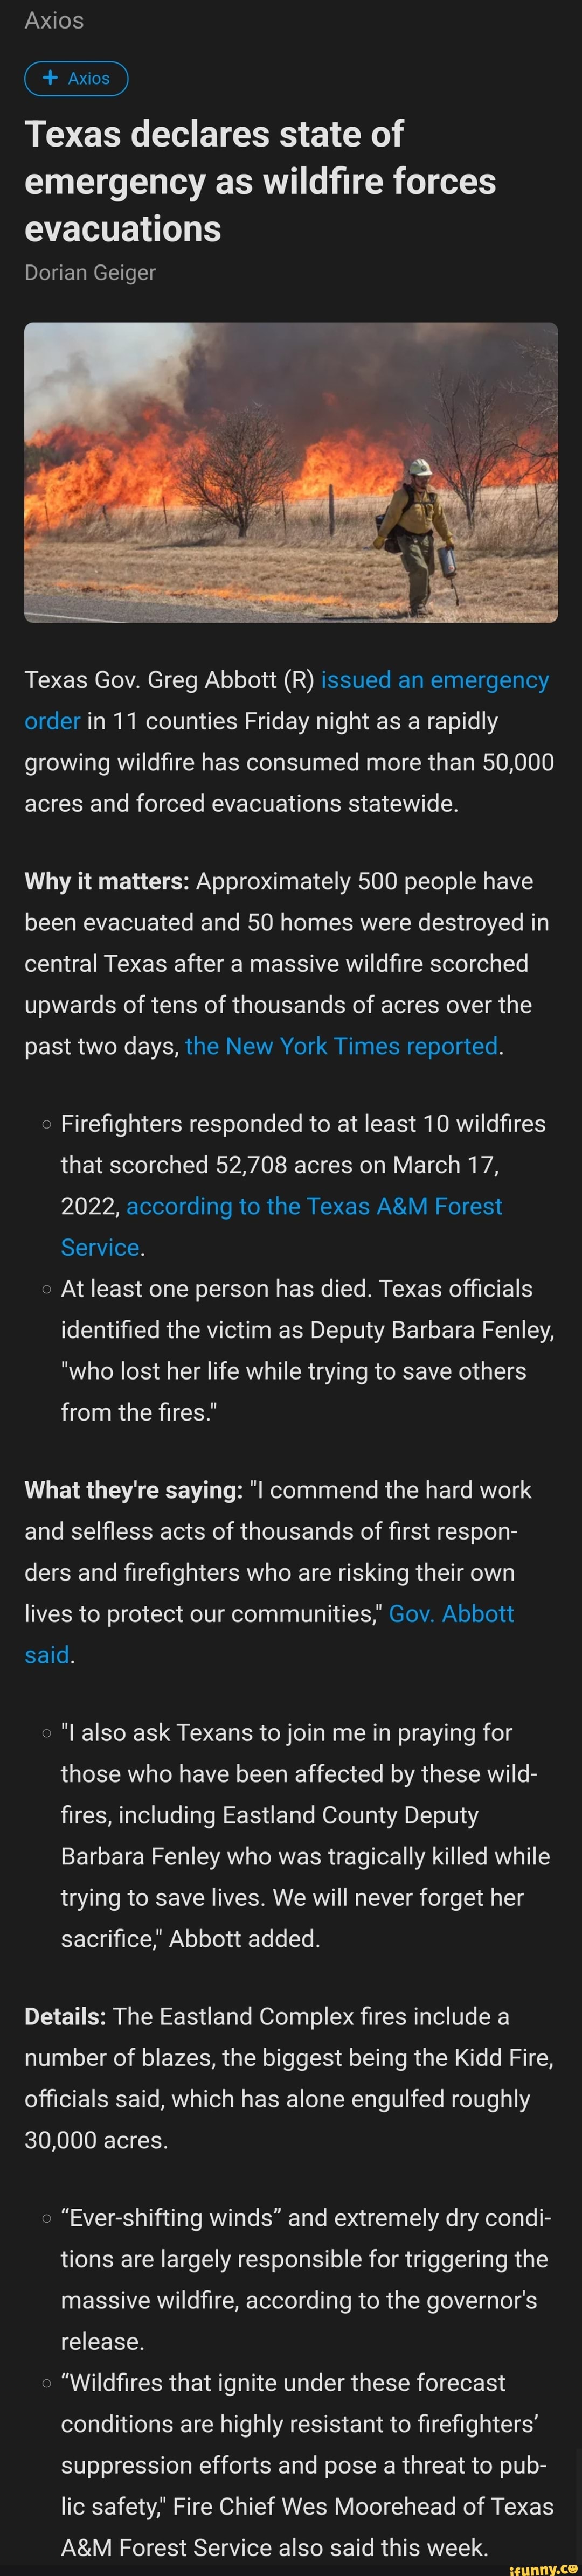 Texas declares state of emergency as wildfire forces evacuations Axios